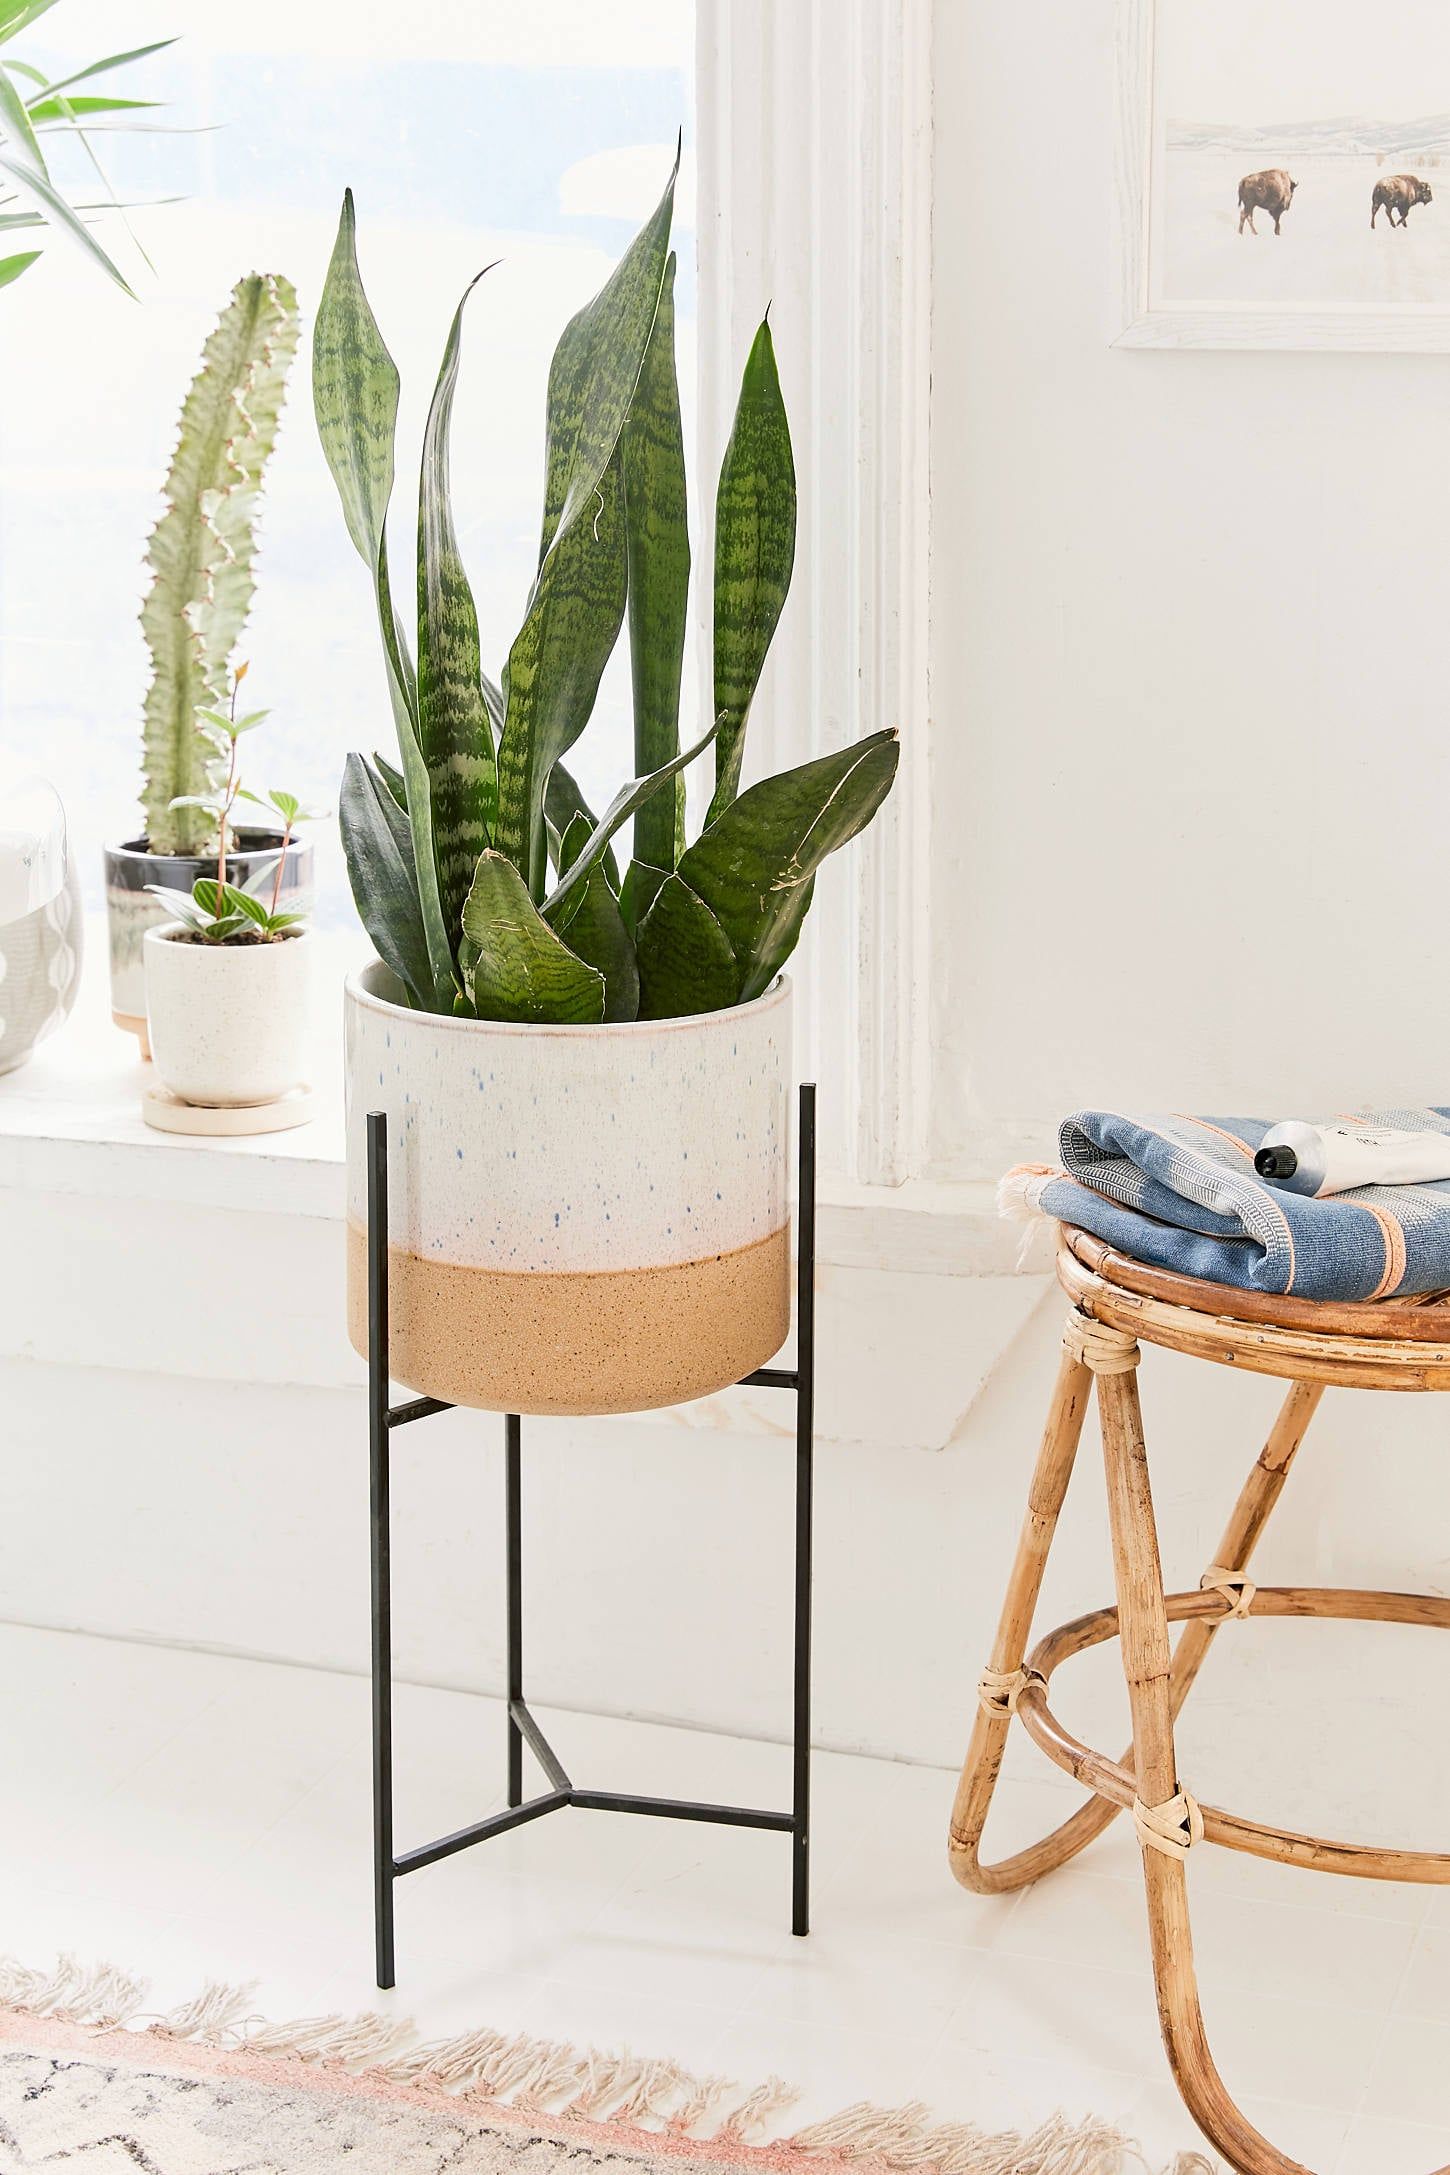 Brina 10 Inch Planter And Stand | 104 Plant Tastic Gifts That Will  Transform Any Home Into A Lush Oasis | Popsugar Home Photo 22 With Regard To 10 Inch Plant Stands (View 13 of 15)